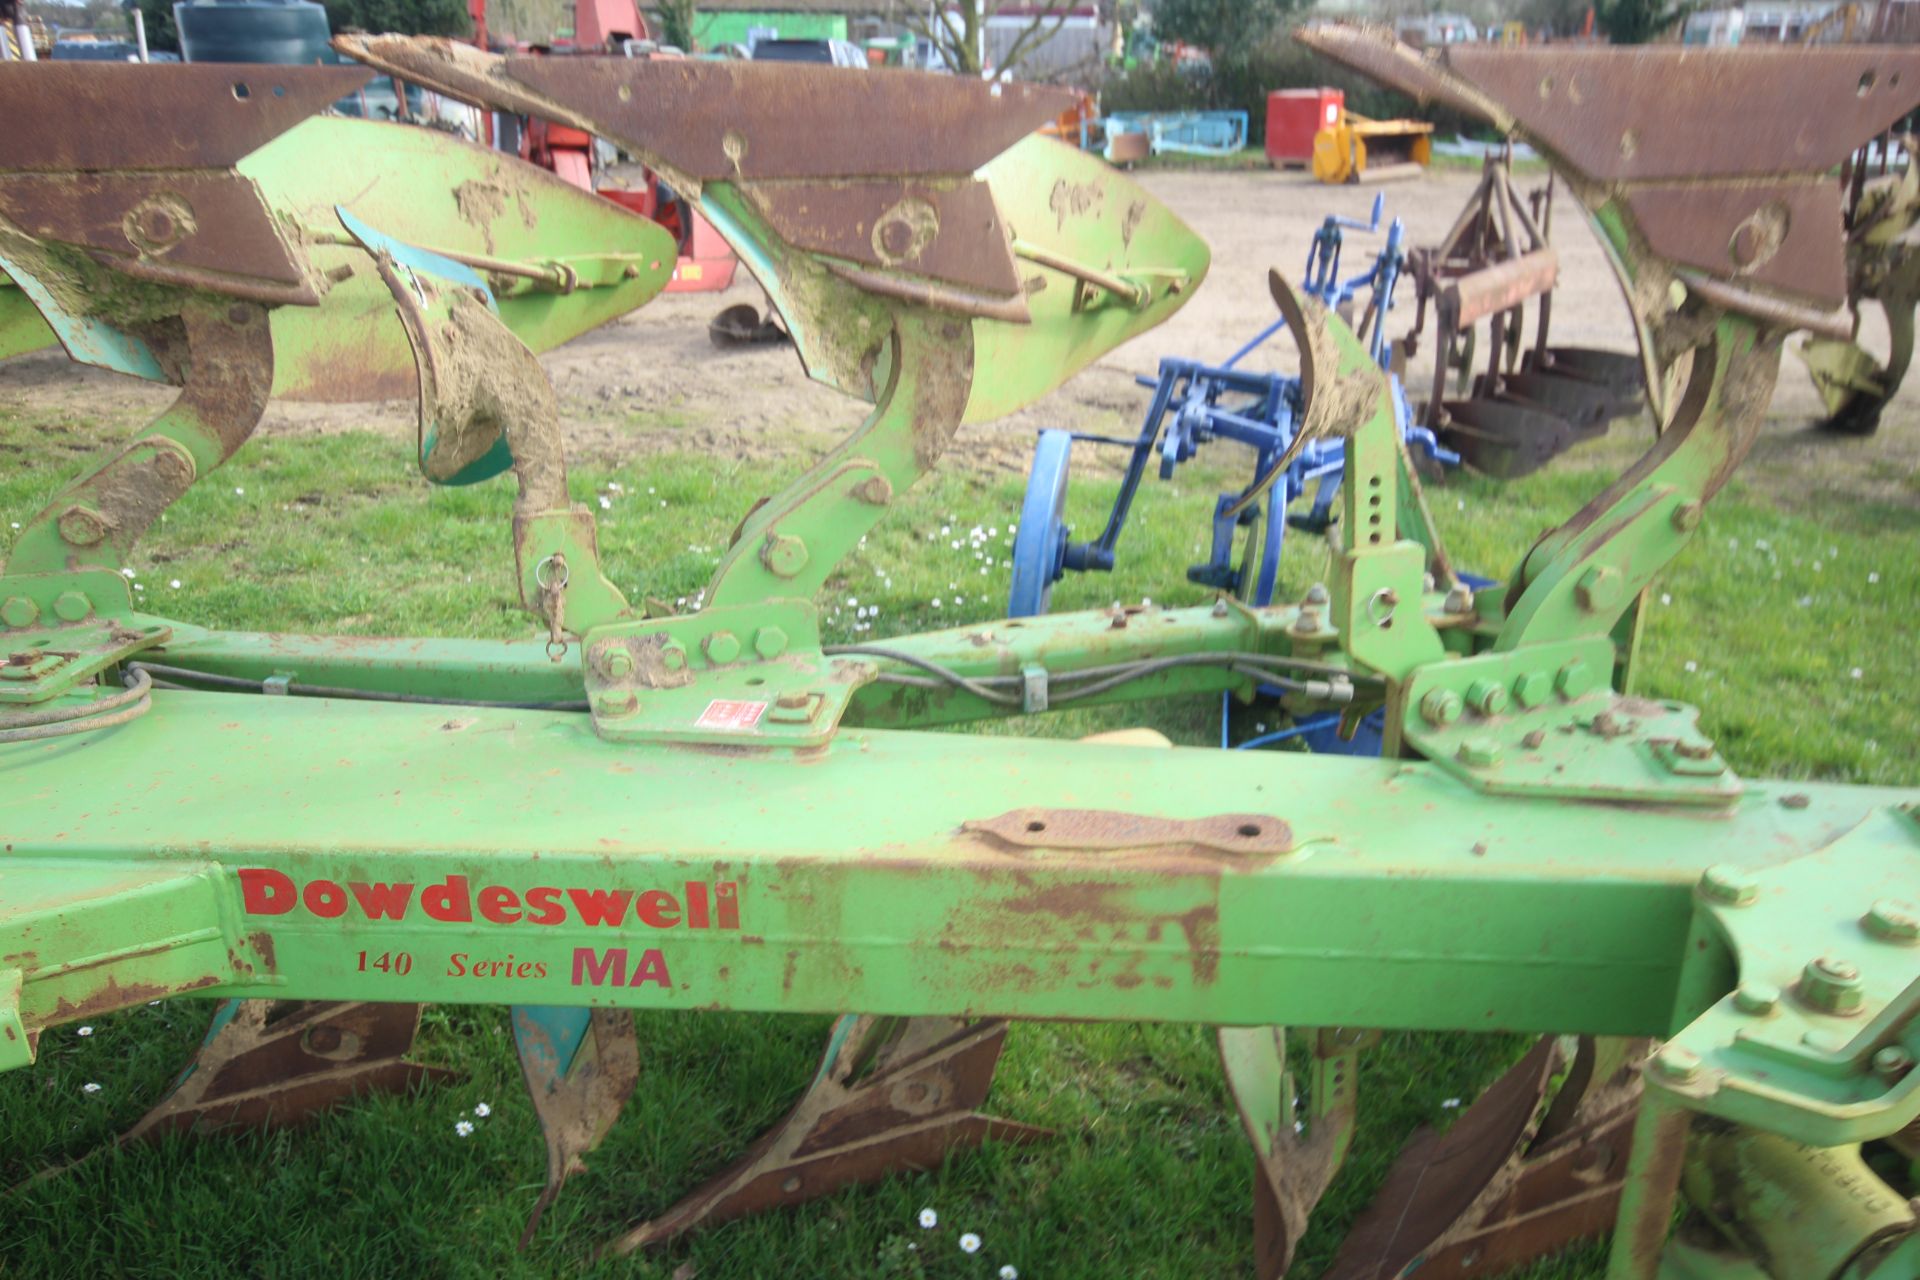 Dowdeswell 140 MA 5+1F reversible plough. With hydraulic press arm. Refurbished by Agri-Hire 2019. - Image 21 of 25